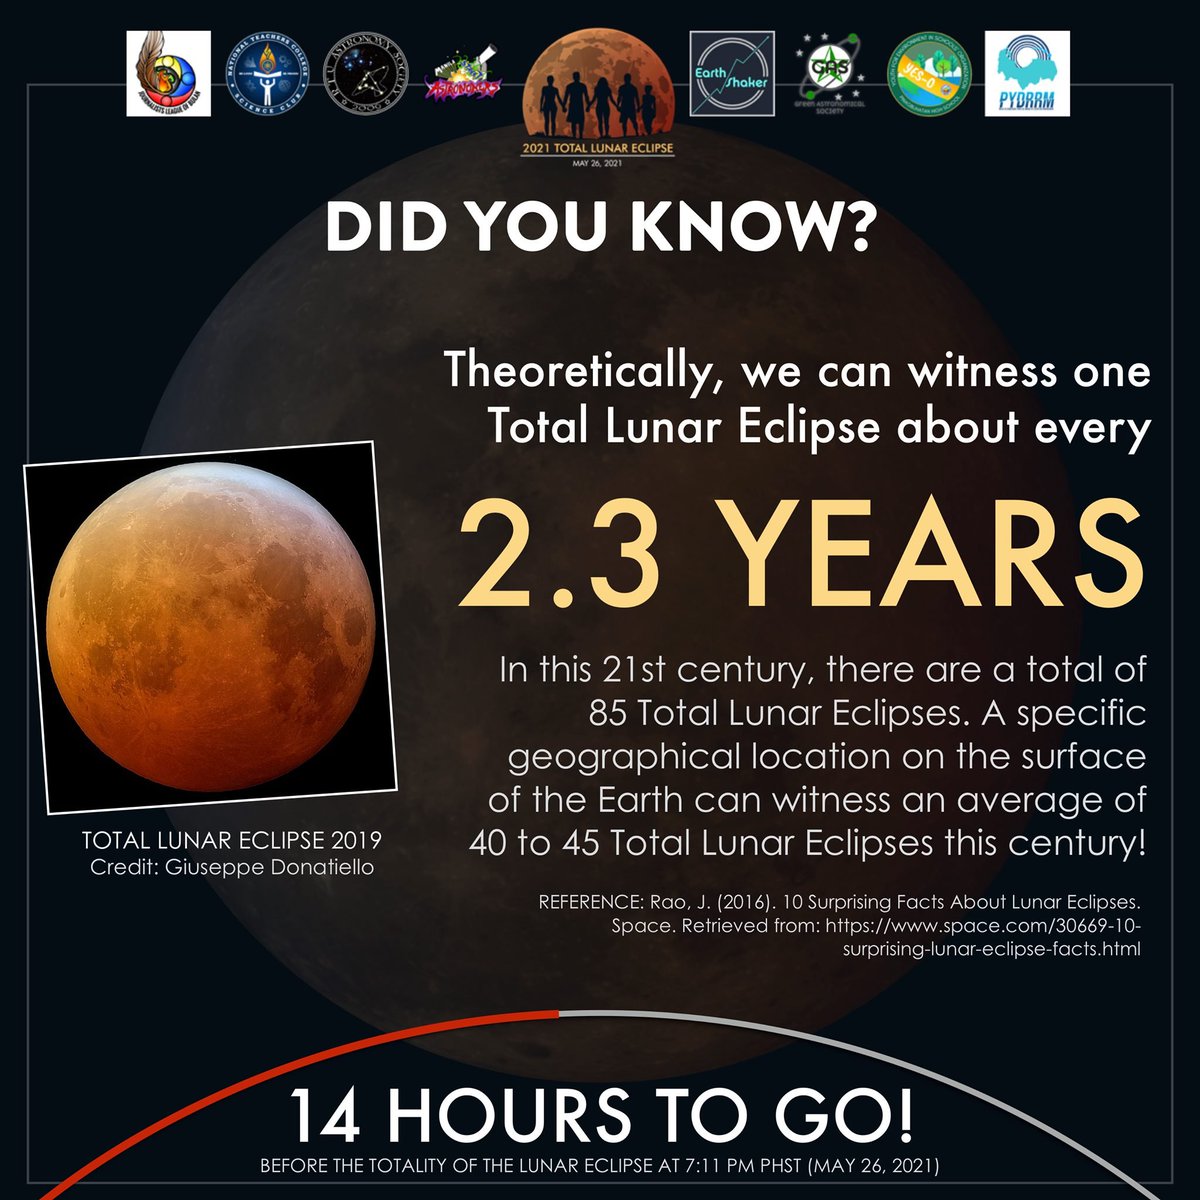 Earth Shaker Ph S Tweet Pulangbuwan21 14 Hours To Go Did You Know Theoretically We Can Witness One Total Lunar Eclipse About Every 2 3 Years Know More About The Eclipse Here Trendsmap